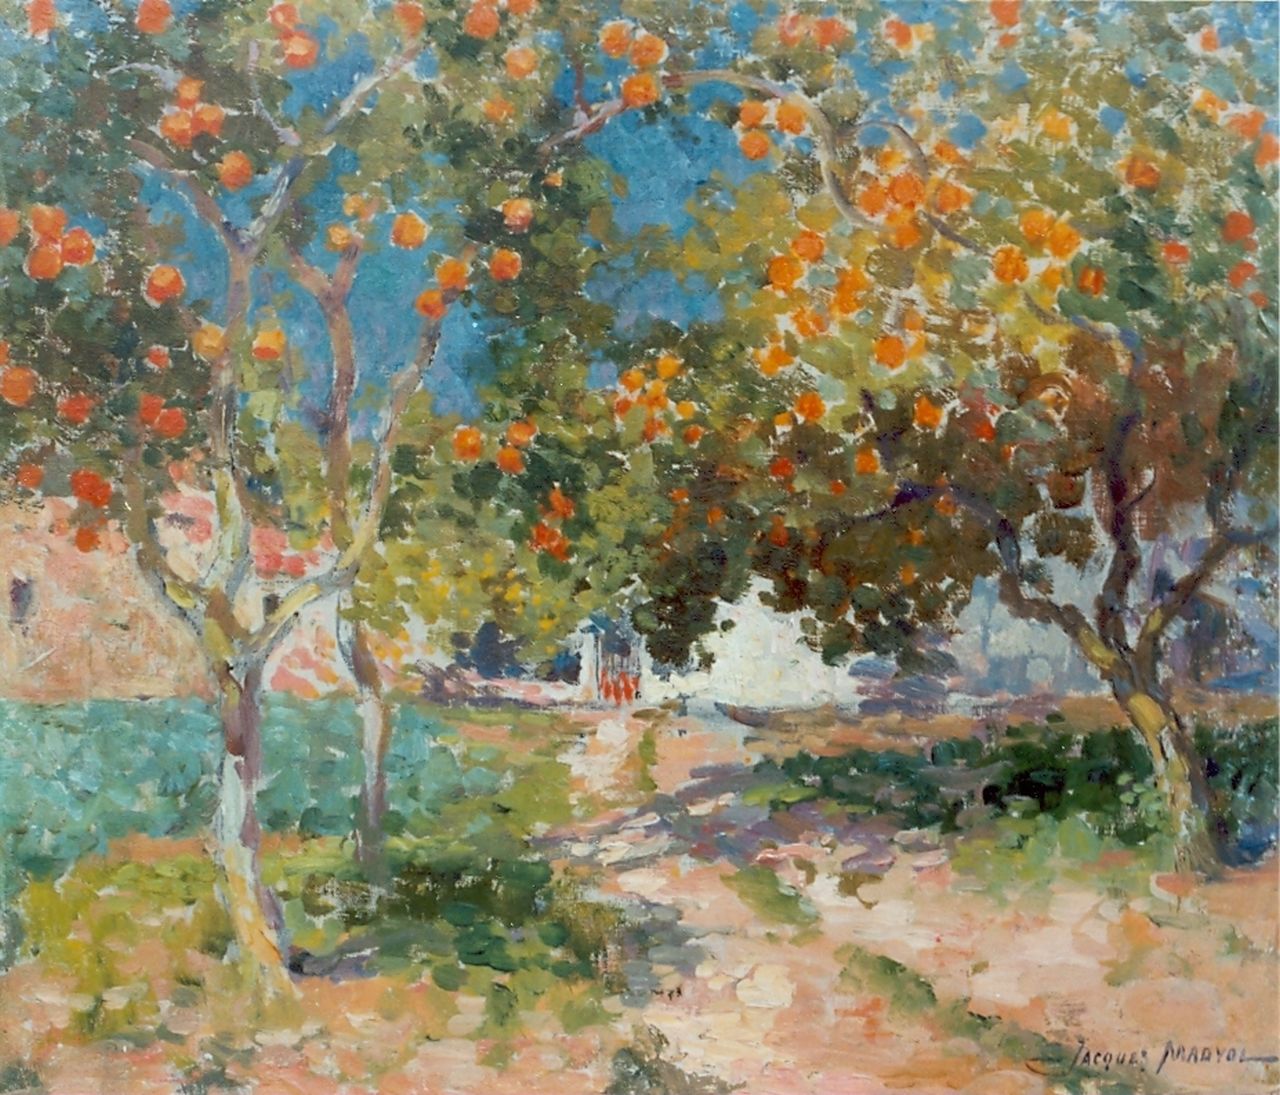 Madiol J.  | Jacob Madiol, Orchard, oil on canvas 45.0 x 52.3 cm, signed l.r.